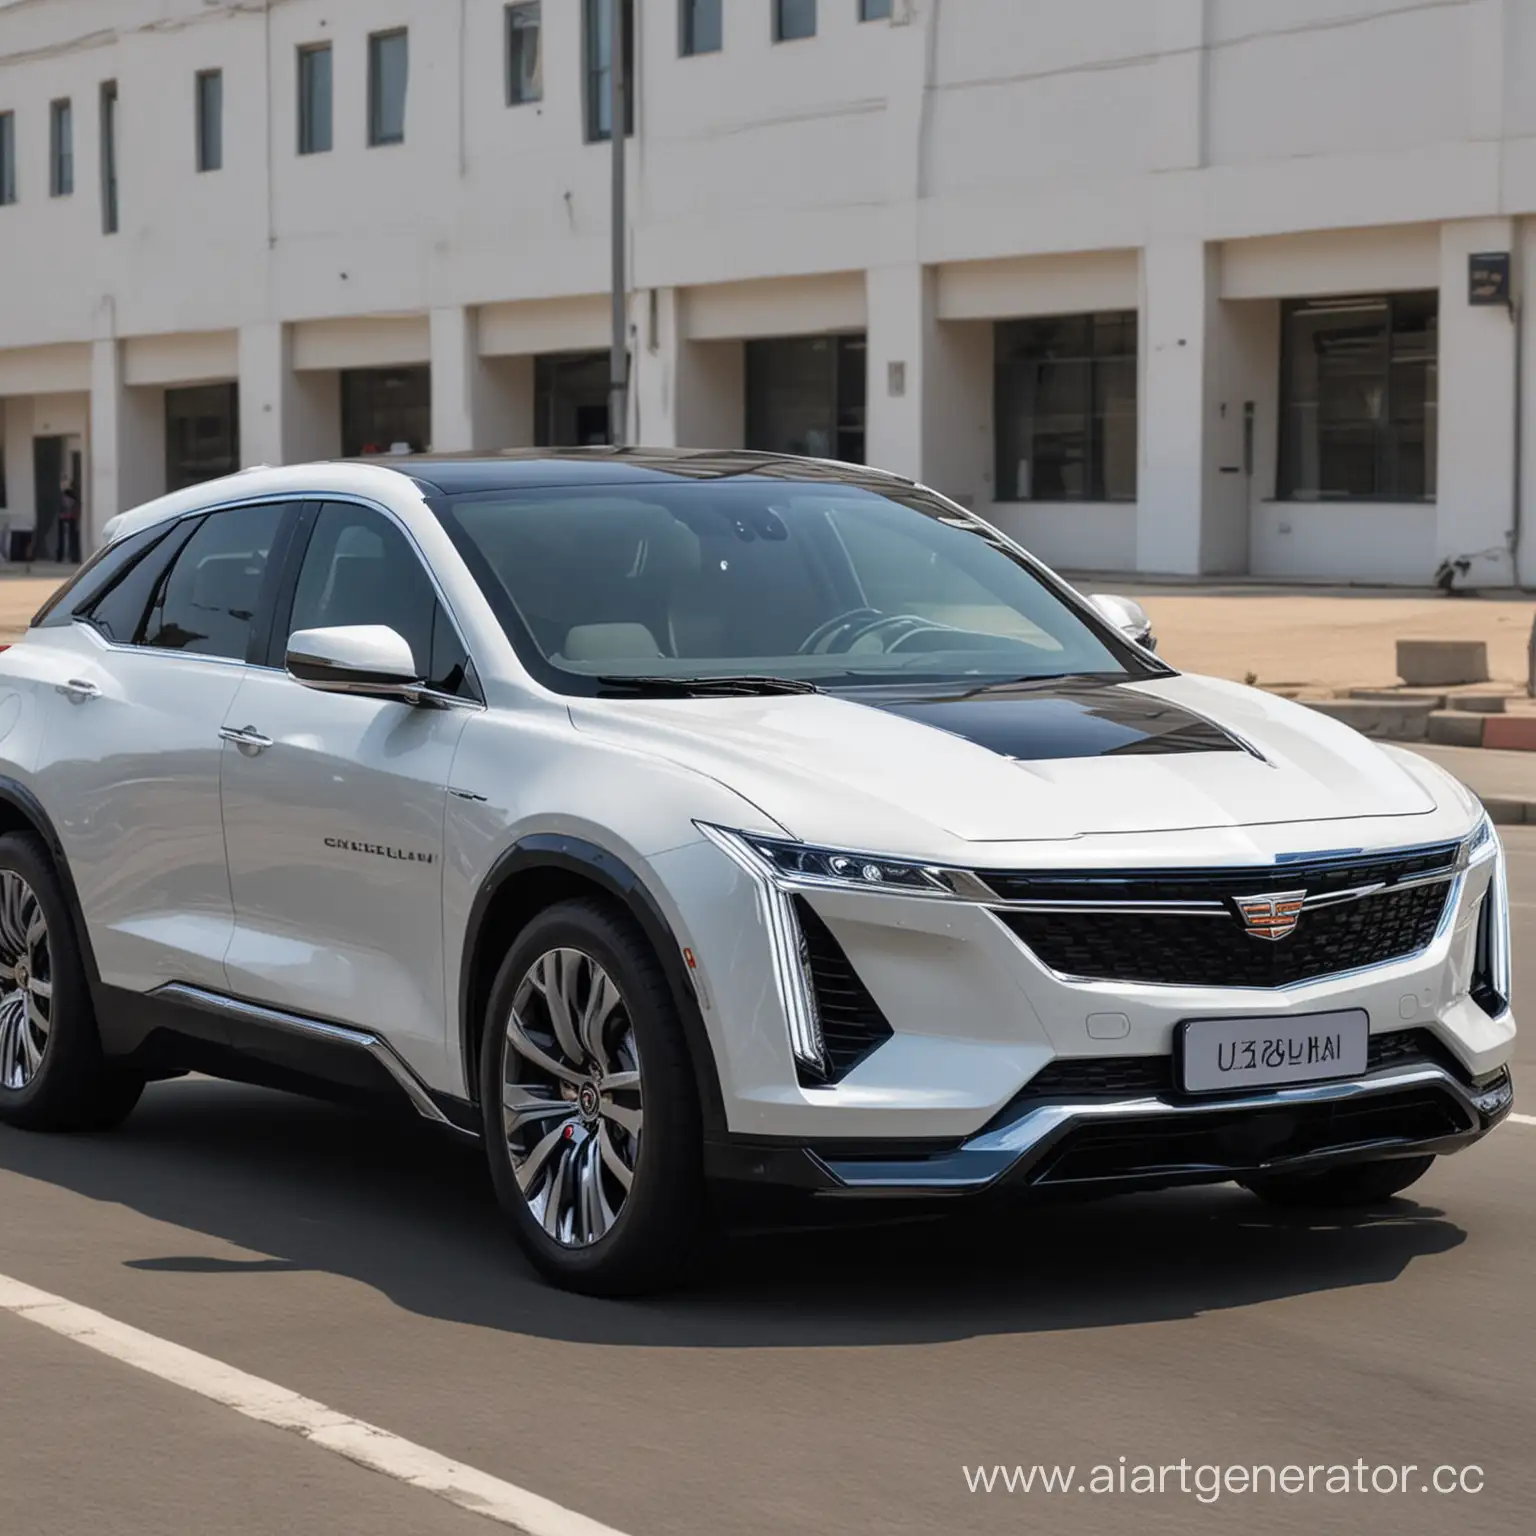 uzbekistan with fabulous electric cars in the future
in the form of cadillac under the name of UZBEK
